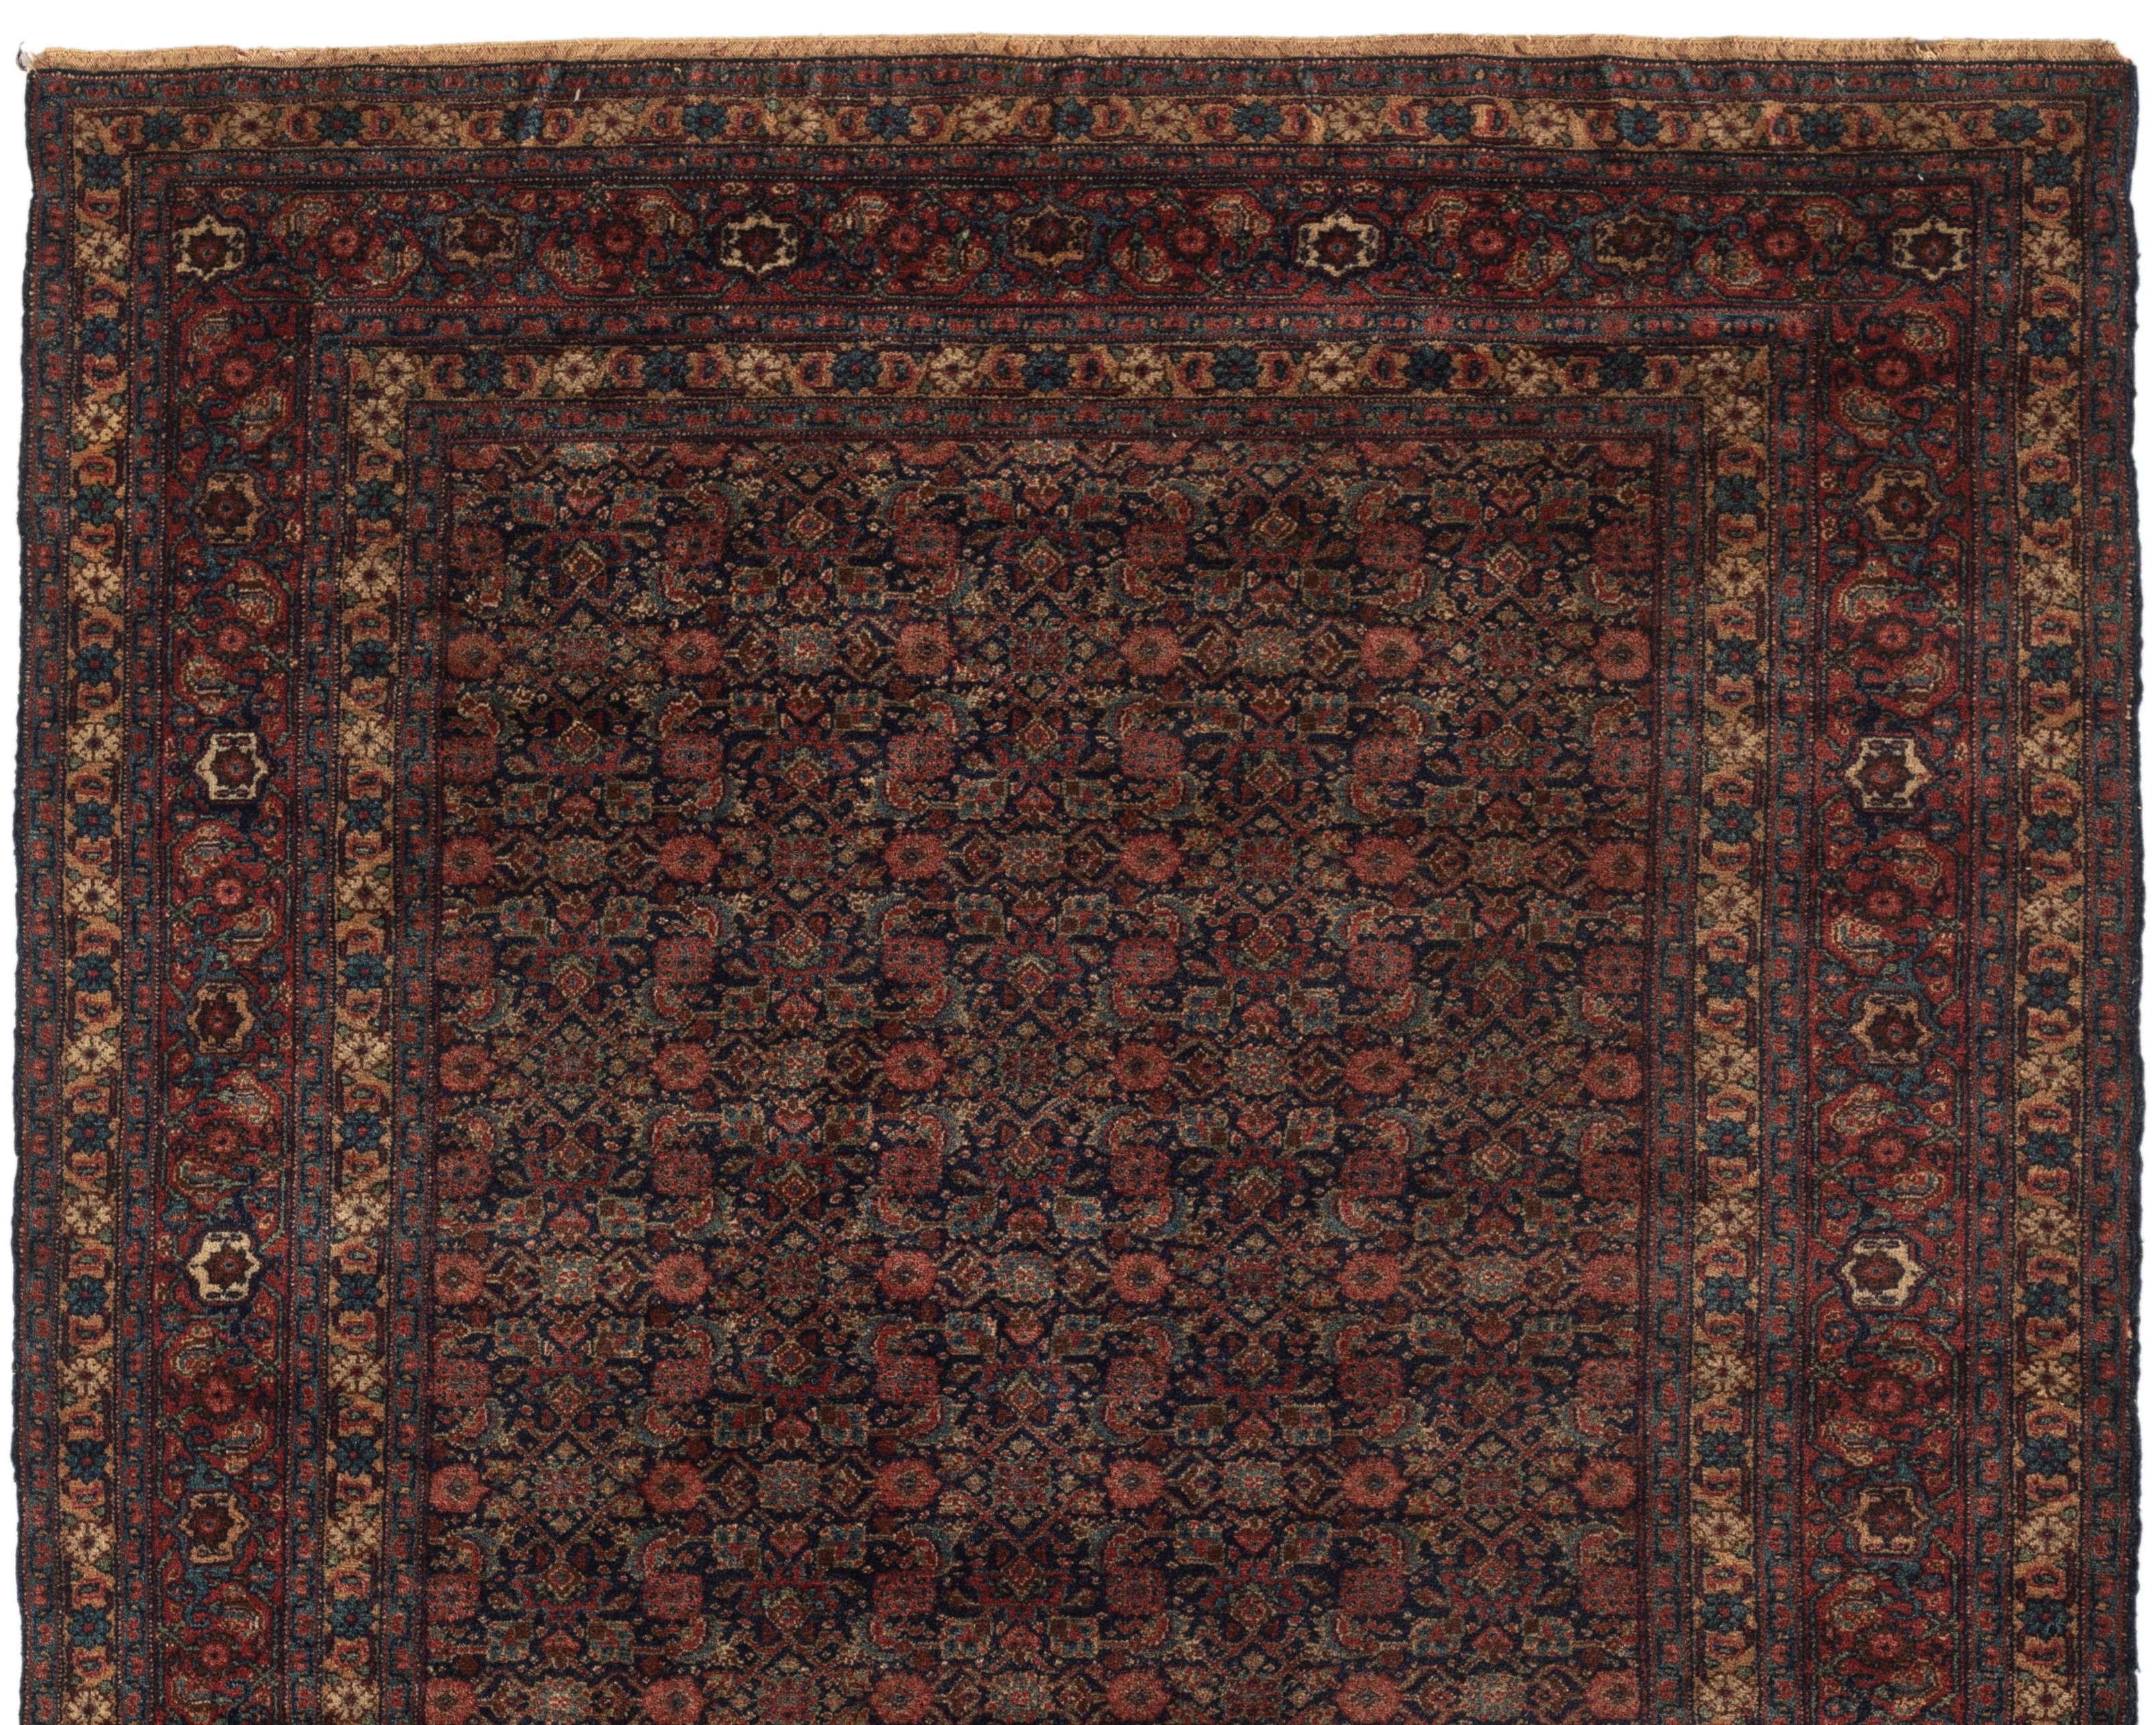 Antique Senneh rug, circa 1900. One of a matching pair. From the town of Senha (Sanandaj) in Kurdistan come antique rugs that attain nearly miraculous fineness and suppleness. And they are rugs, almost never room sizes or runners. The attention to